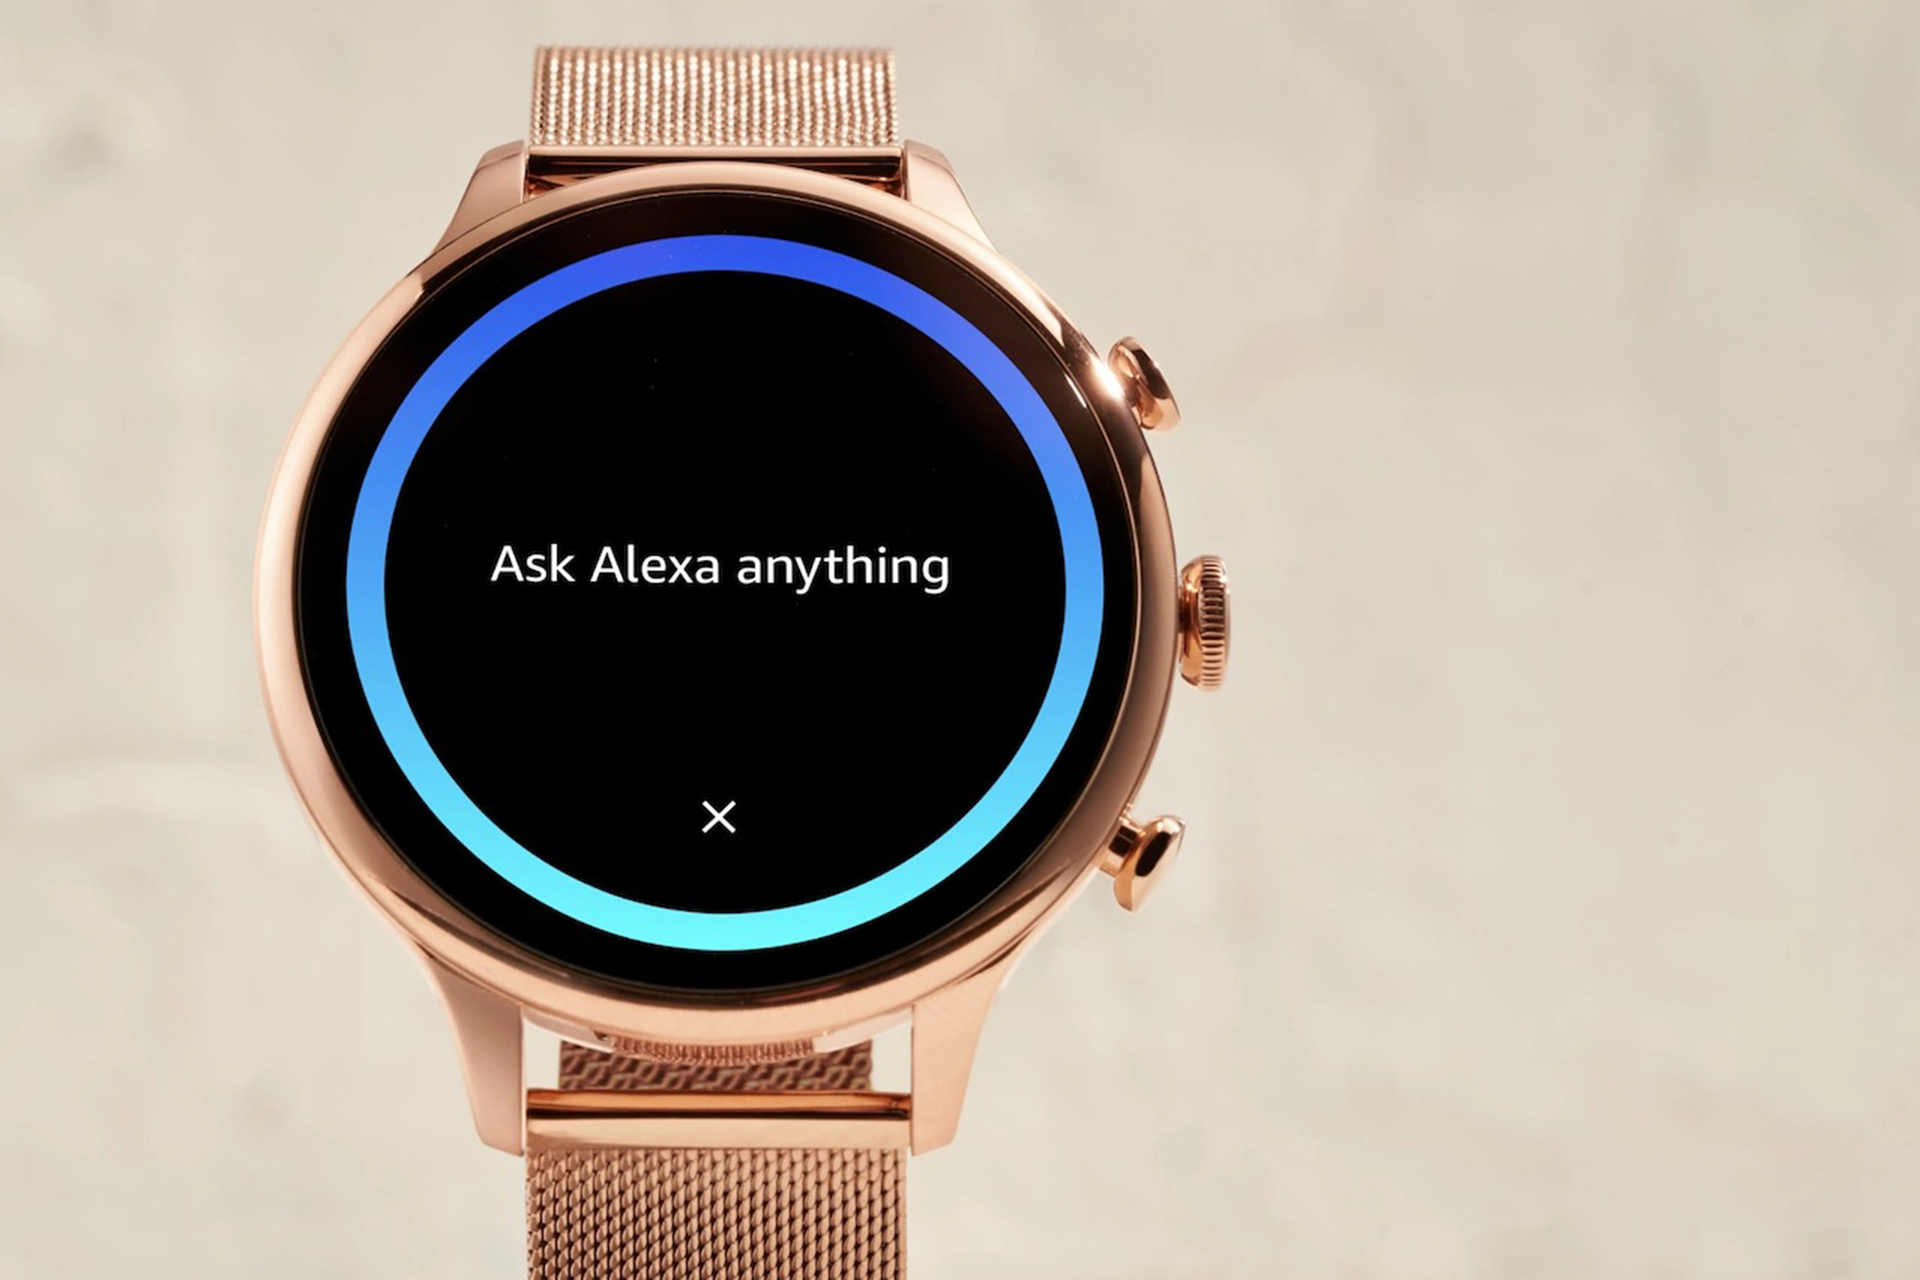 Fossil's latest smartwatches now let you choose Alexa over Google Assistant - Engadget